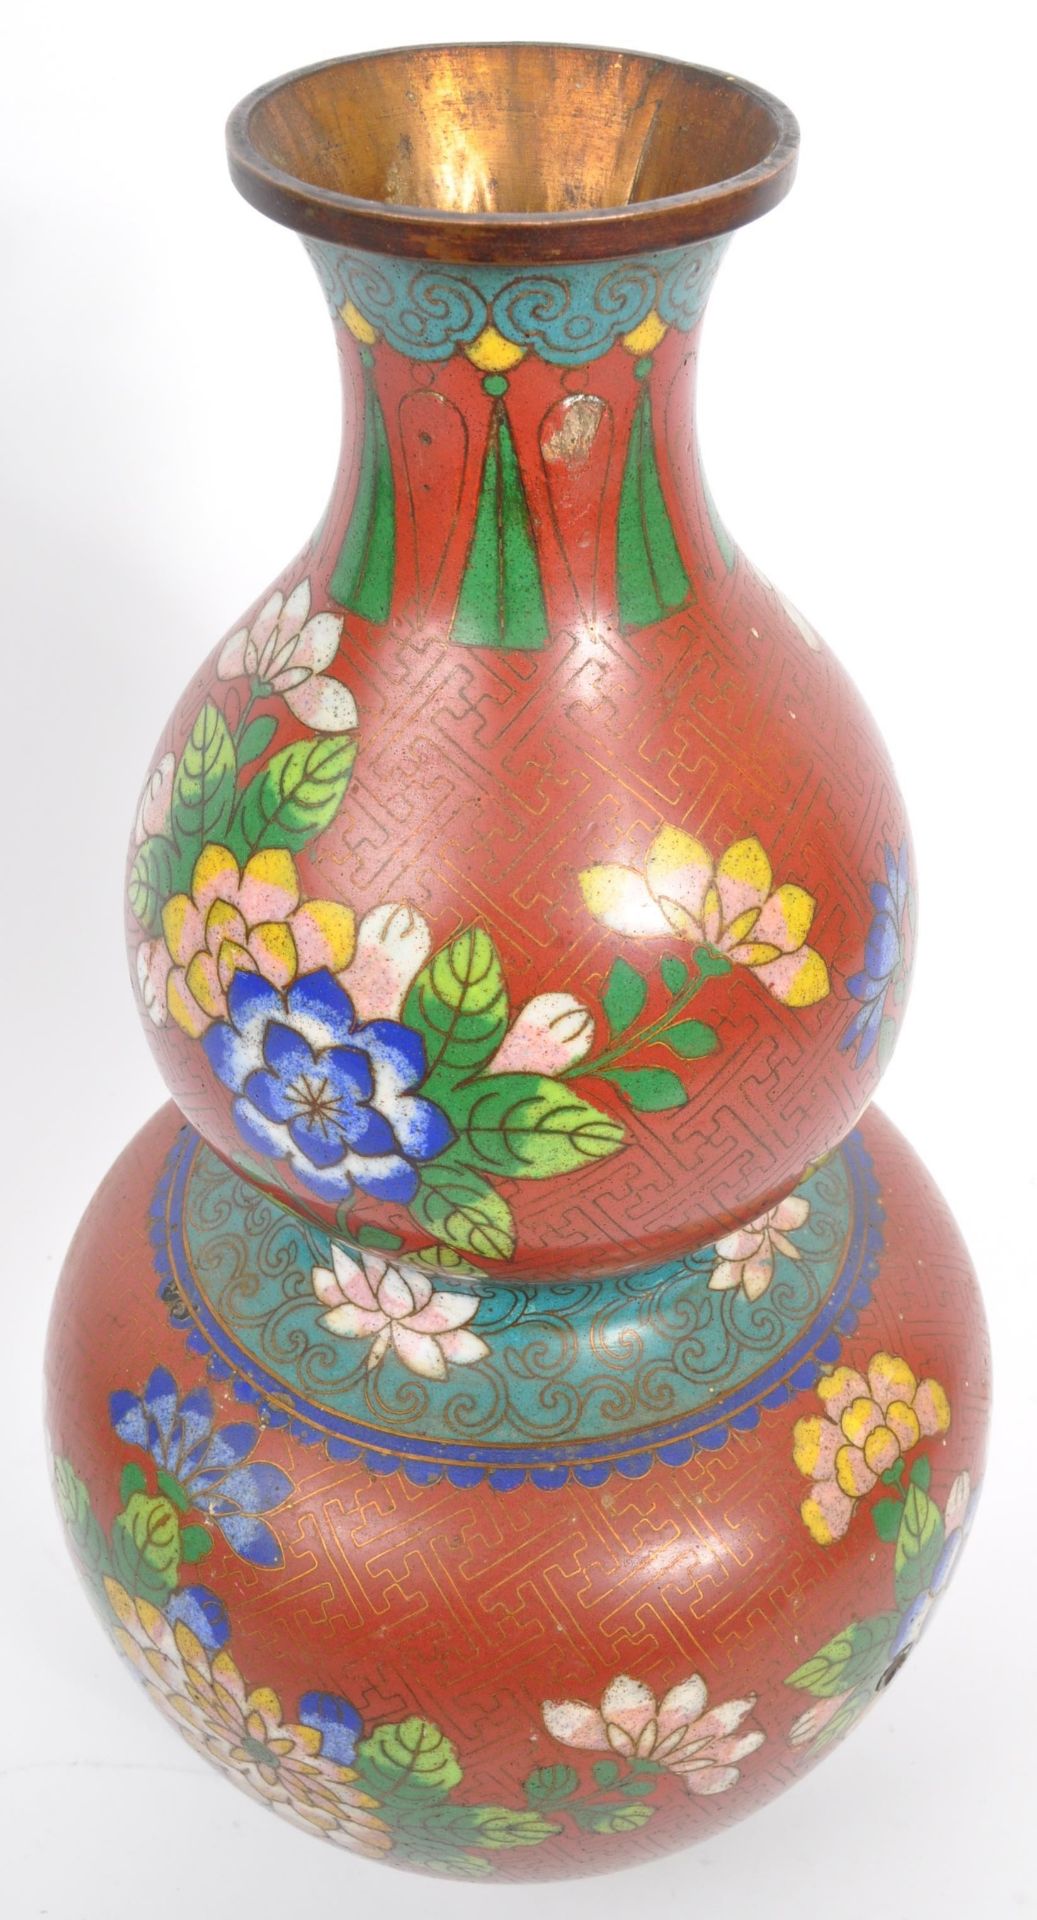 EARLY 20TH CENTURY CHINESE ORIENTAL CLOISONNE DUAL GOURD VASE - Image 3 of 6